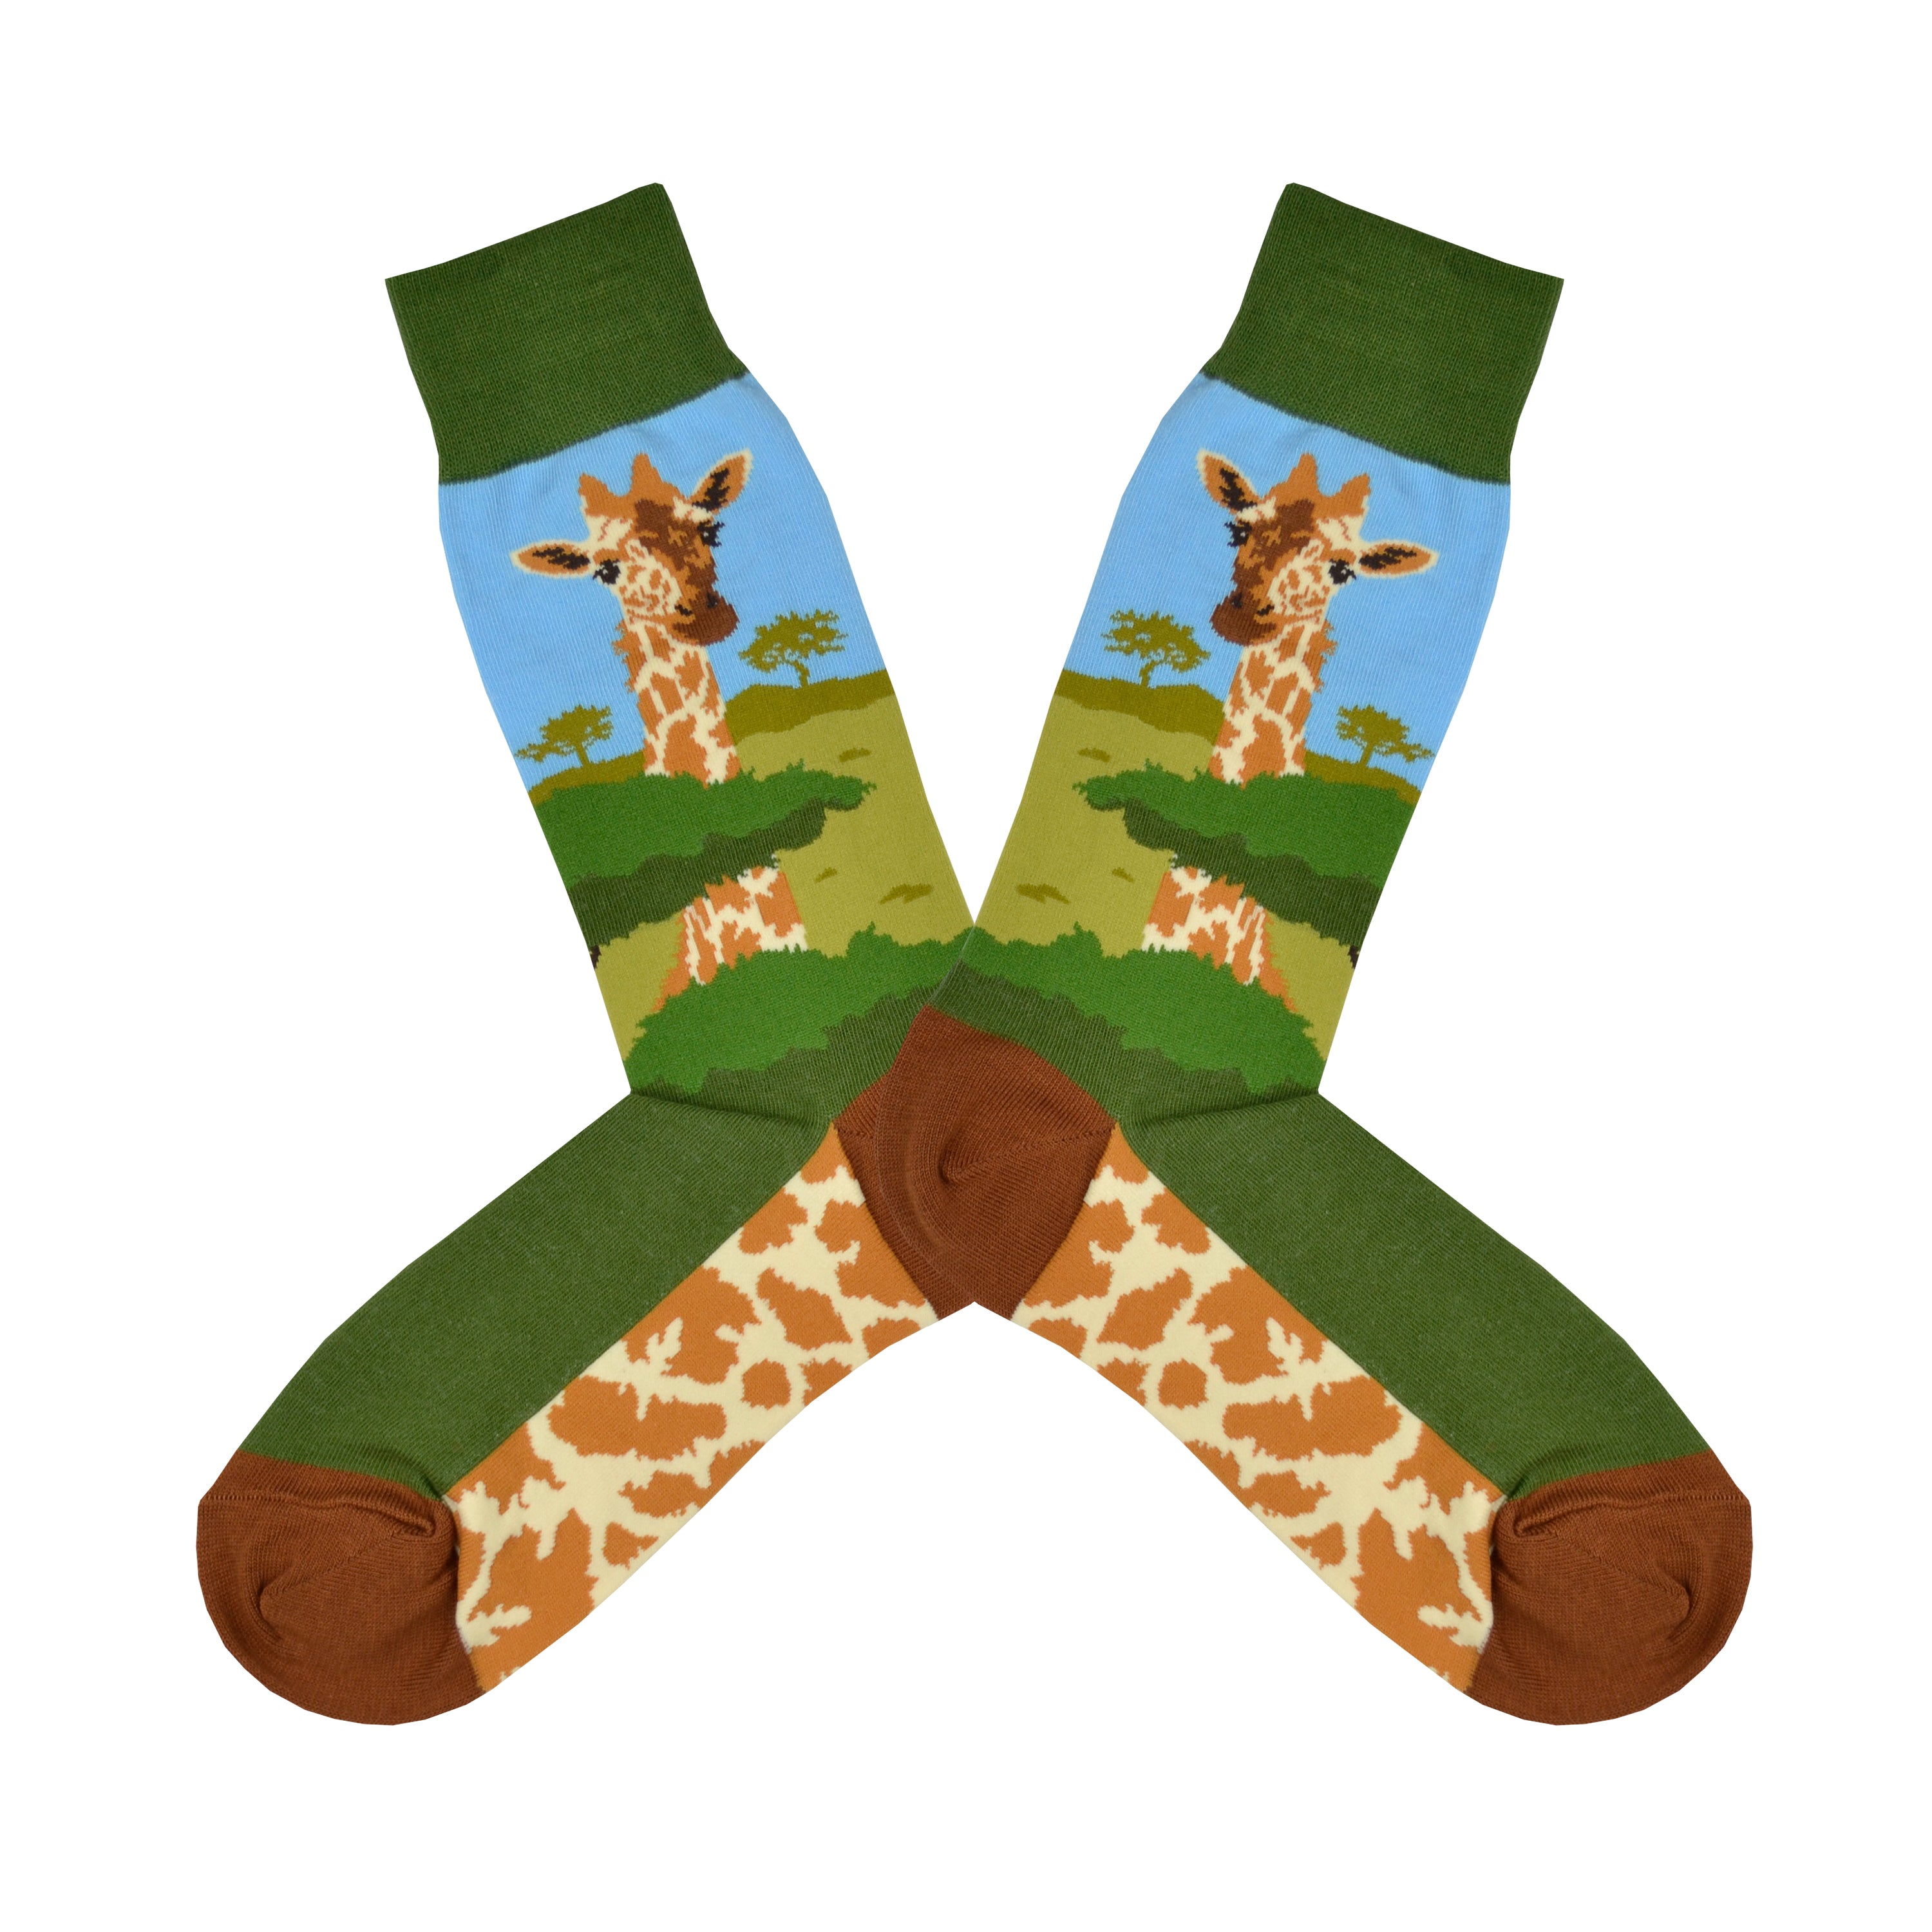 Shown in a flatlay, a pair of Foot Traffic green cotton men's crew socks with a giraffe and acacia trees